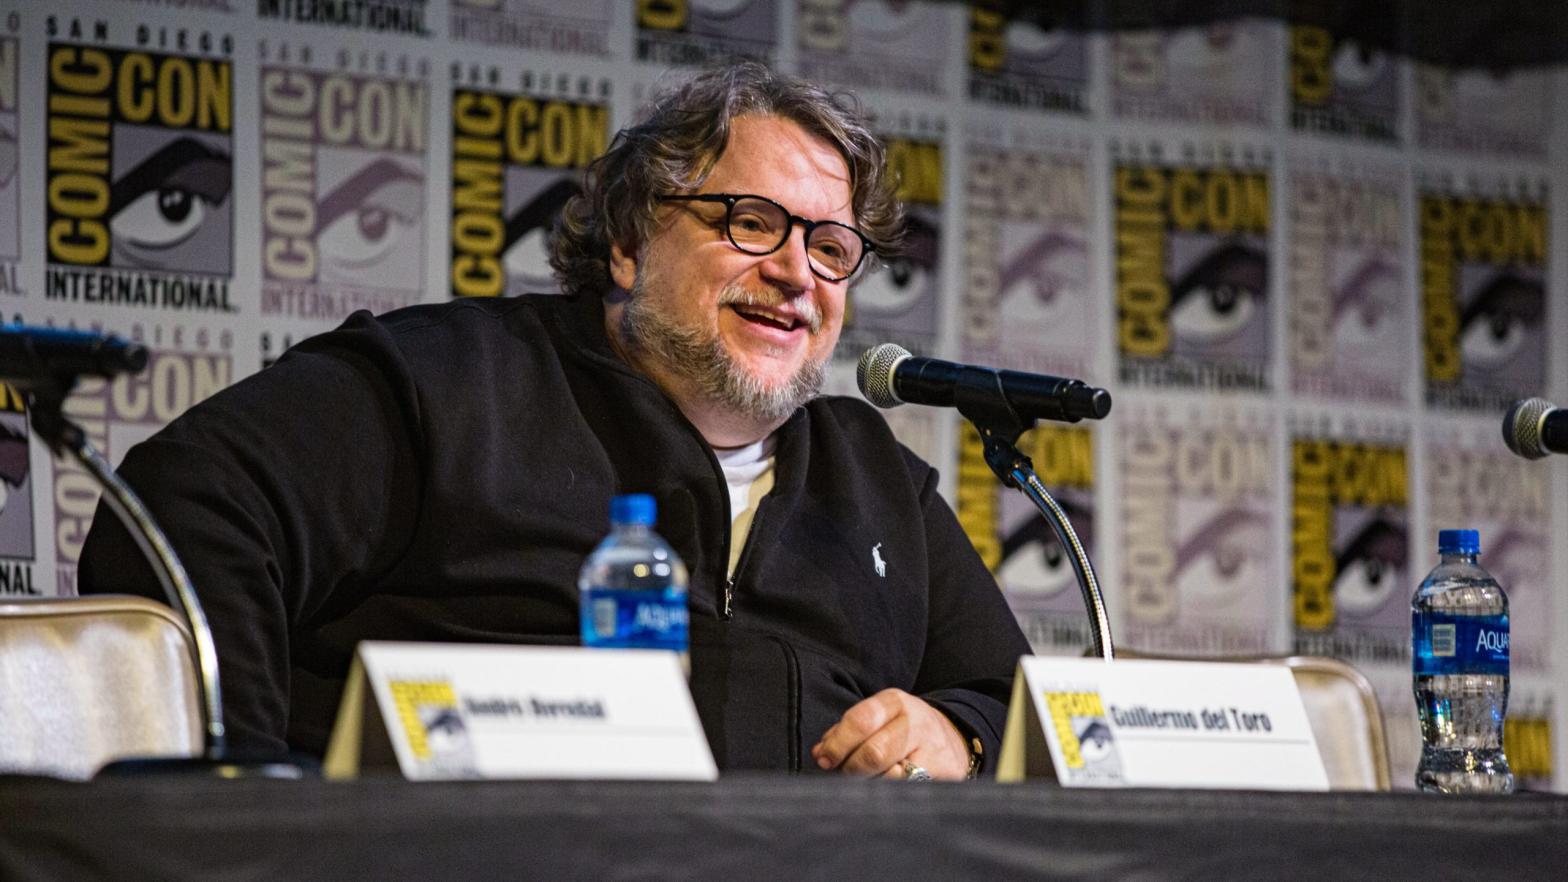 Guillermo del Toro speaks at a 2019 San Diego Comic-Con panel held at the Horton Grand Theatre on July 20, 2019. (Photo: Daniel Knighton, Getty Images)